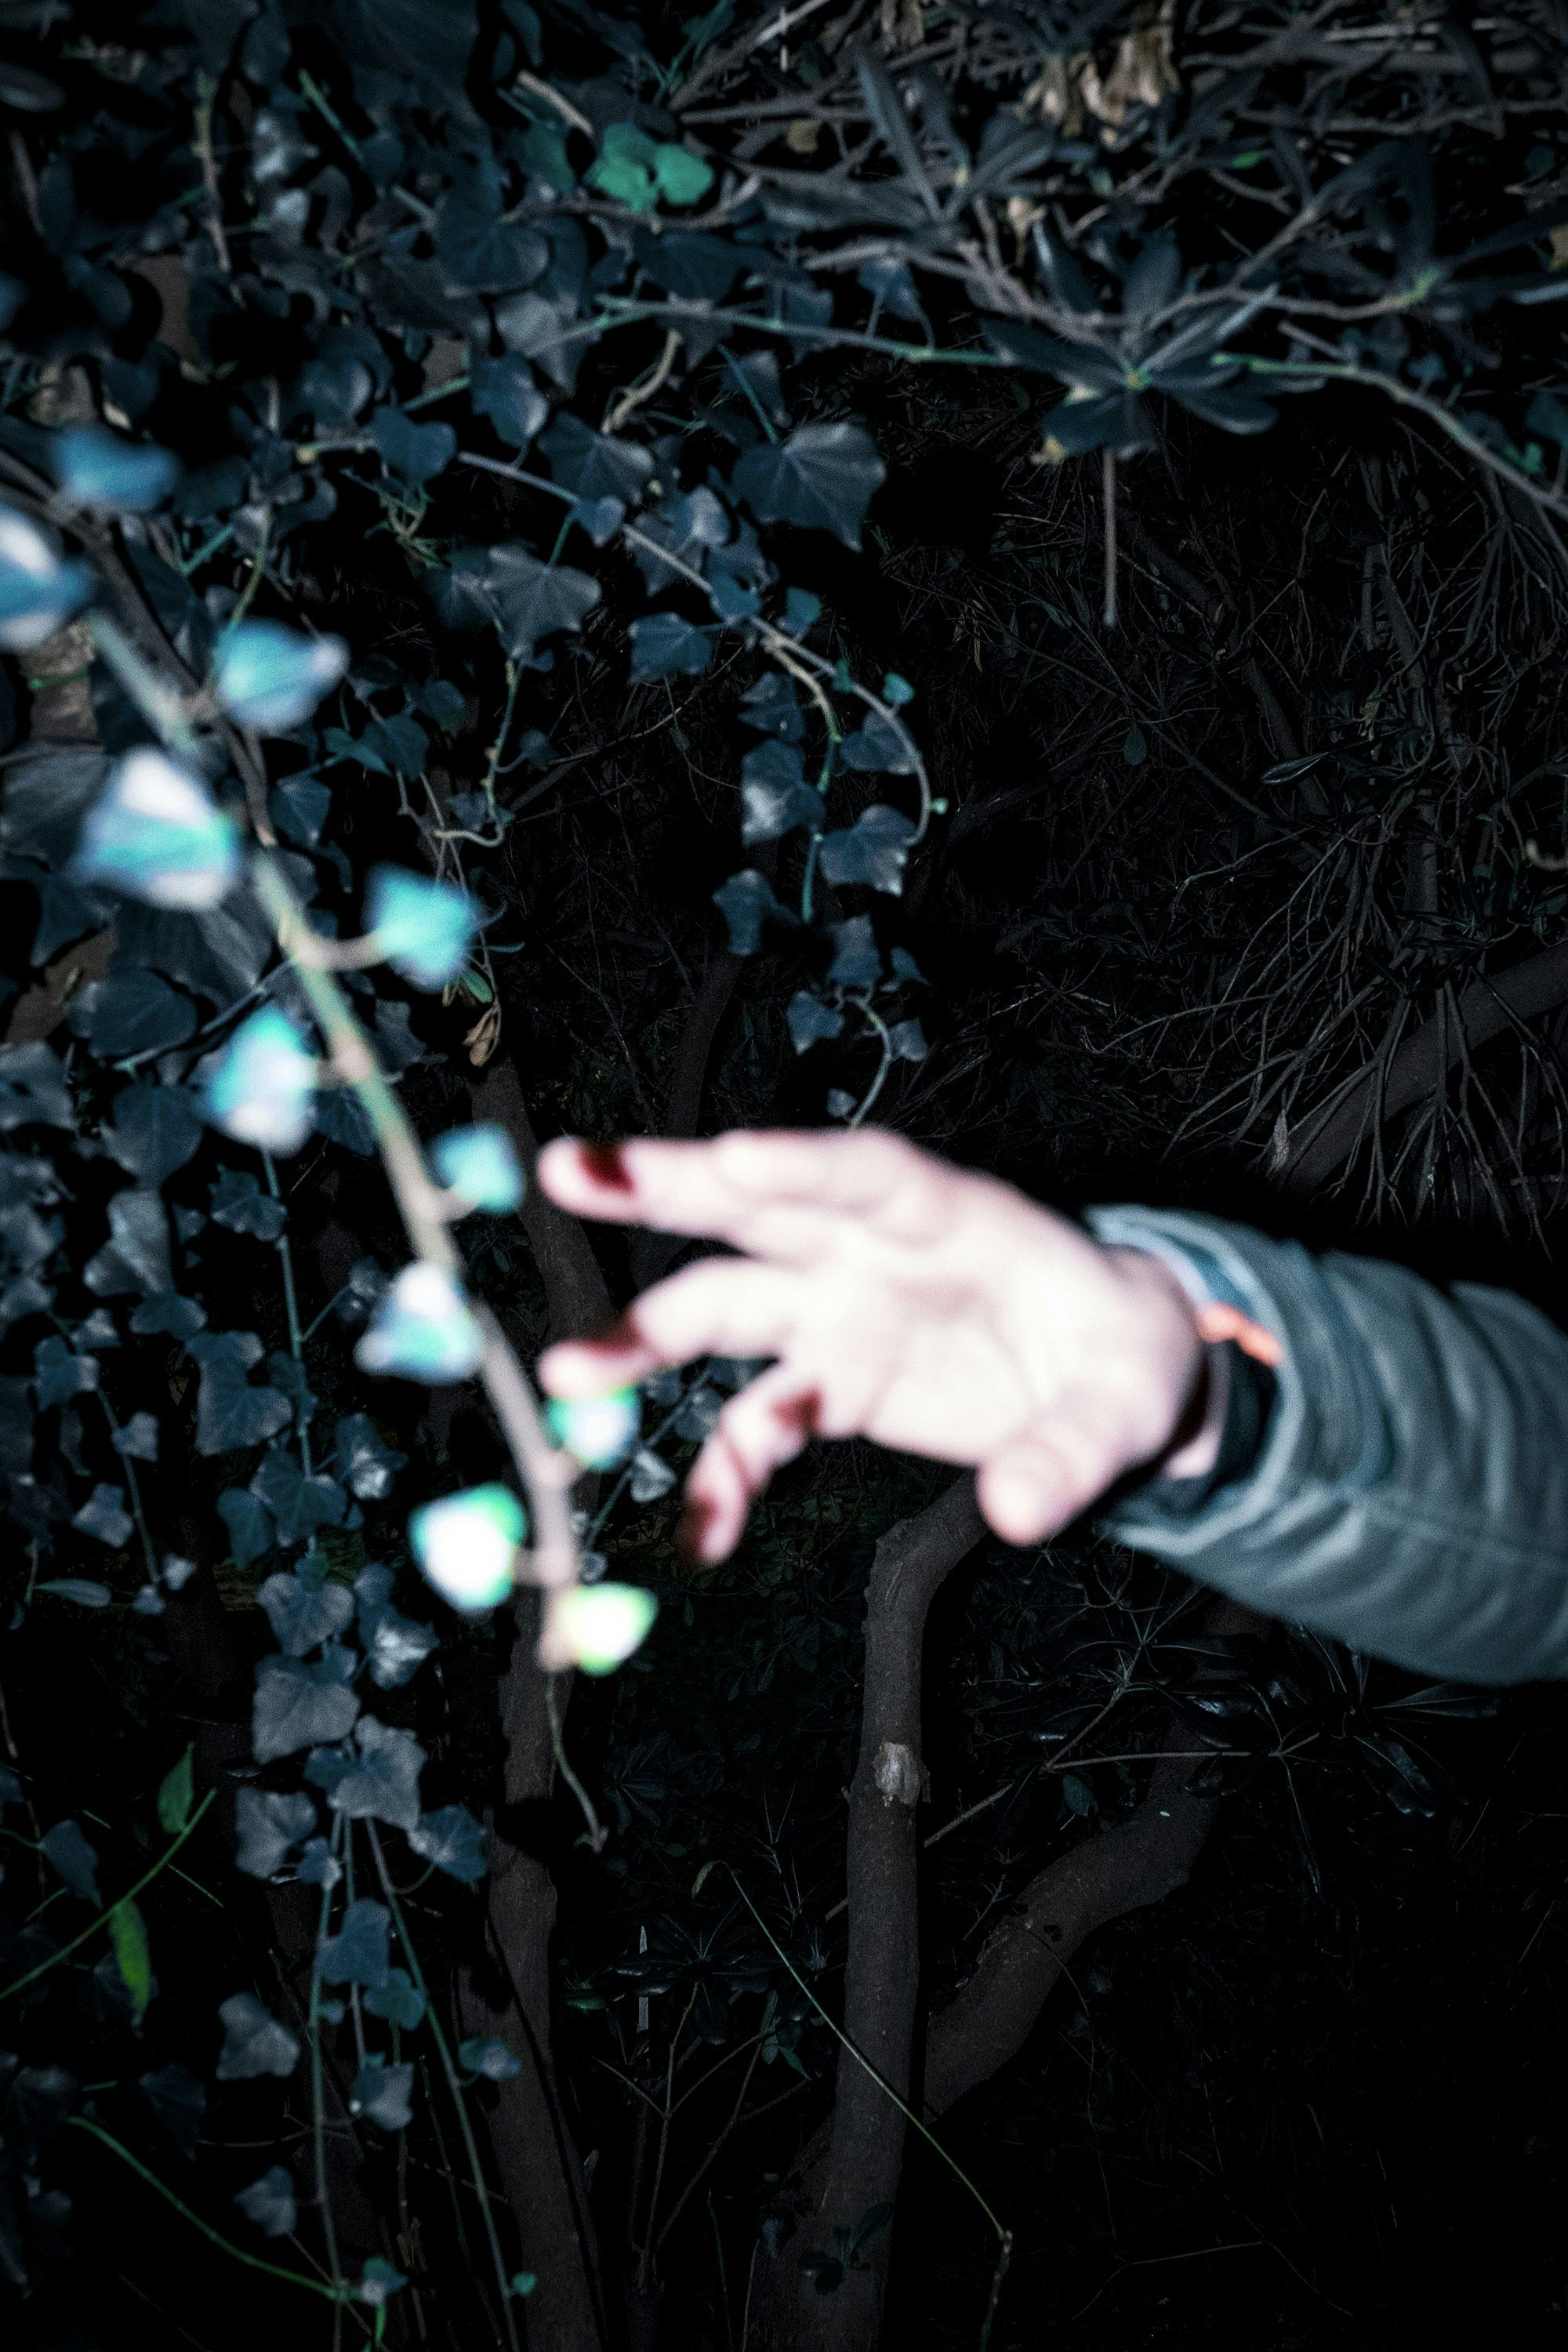 Overexposed photo of a forest detail, showing a hand reaching for a tree branch. © Oğulcan Arslan